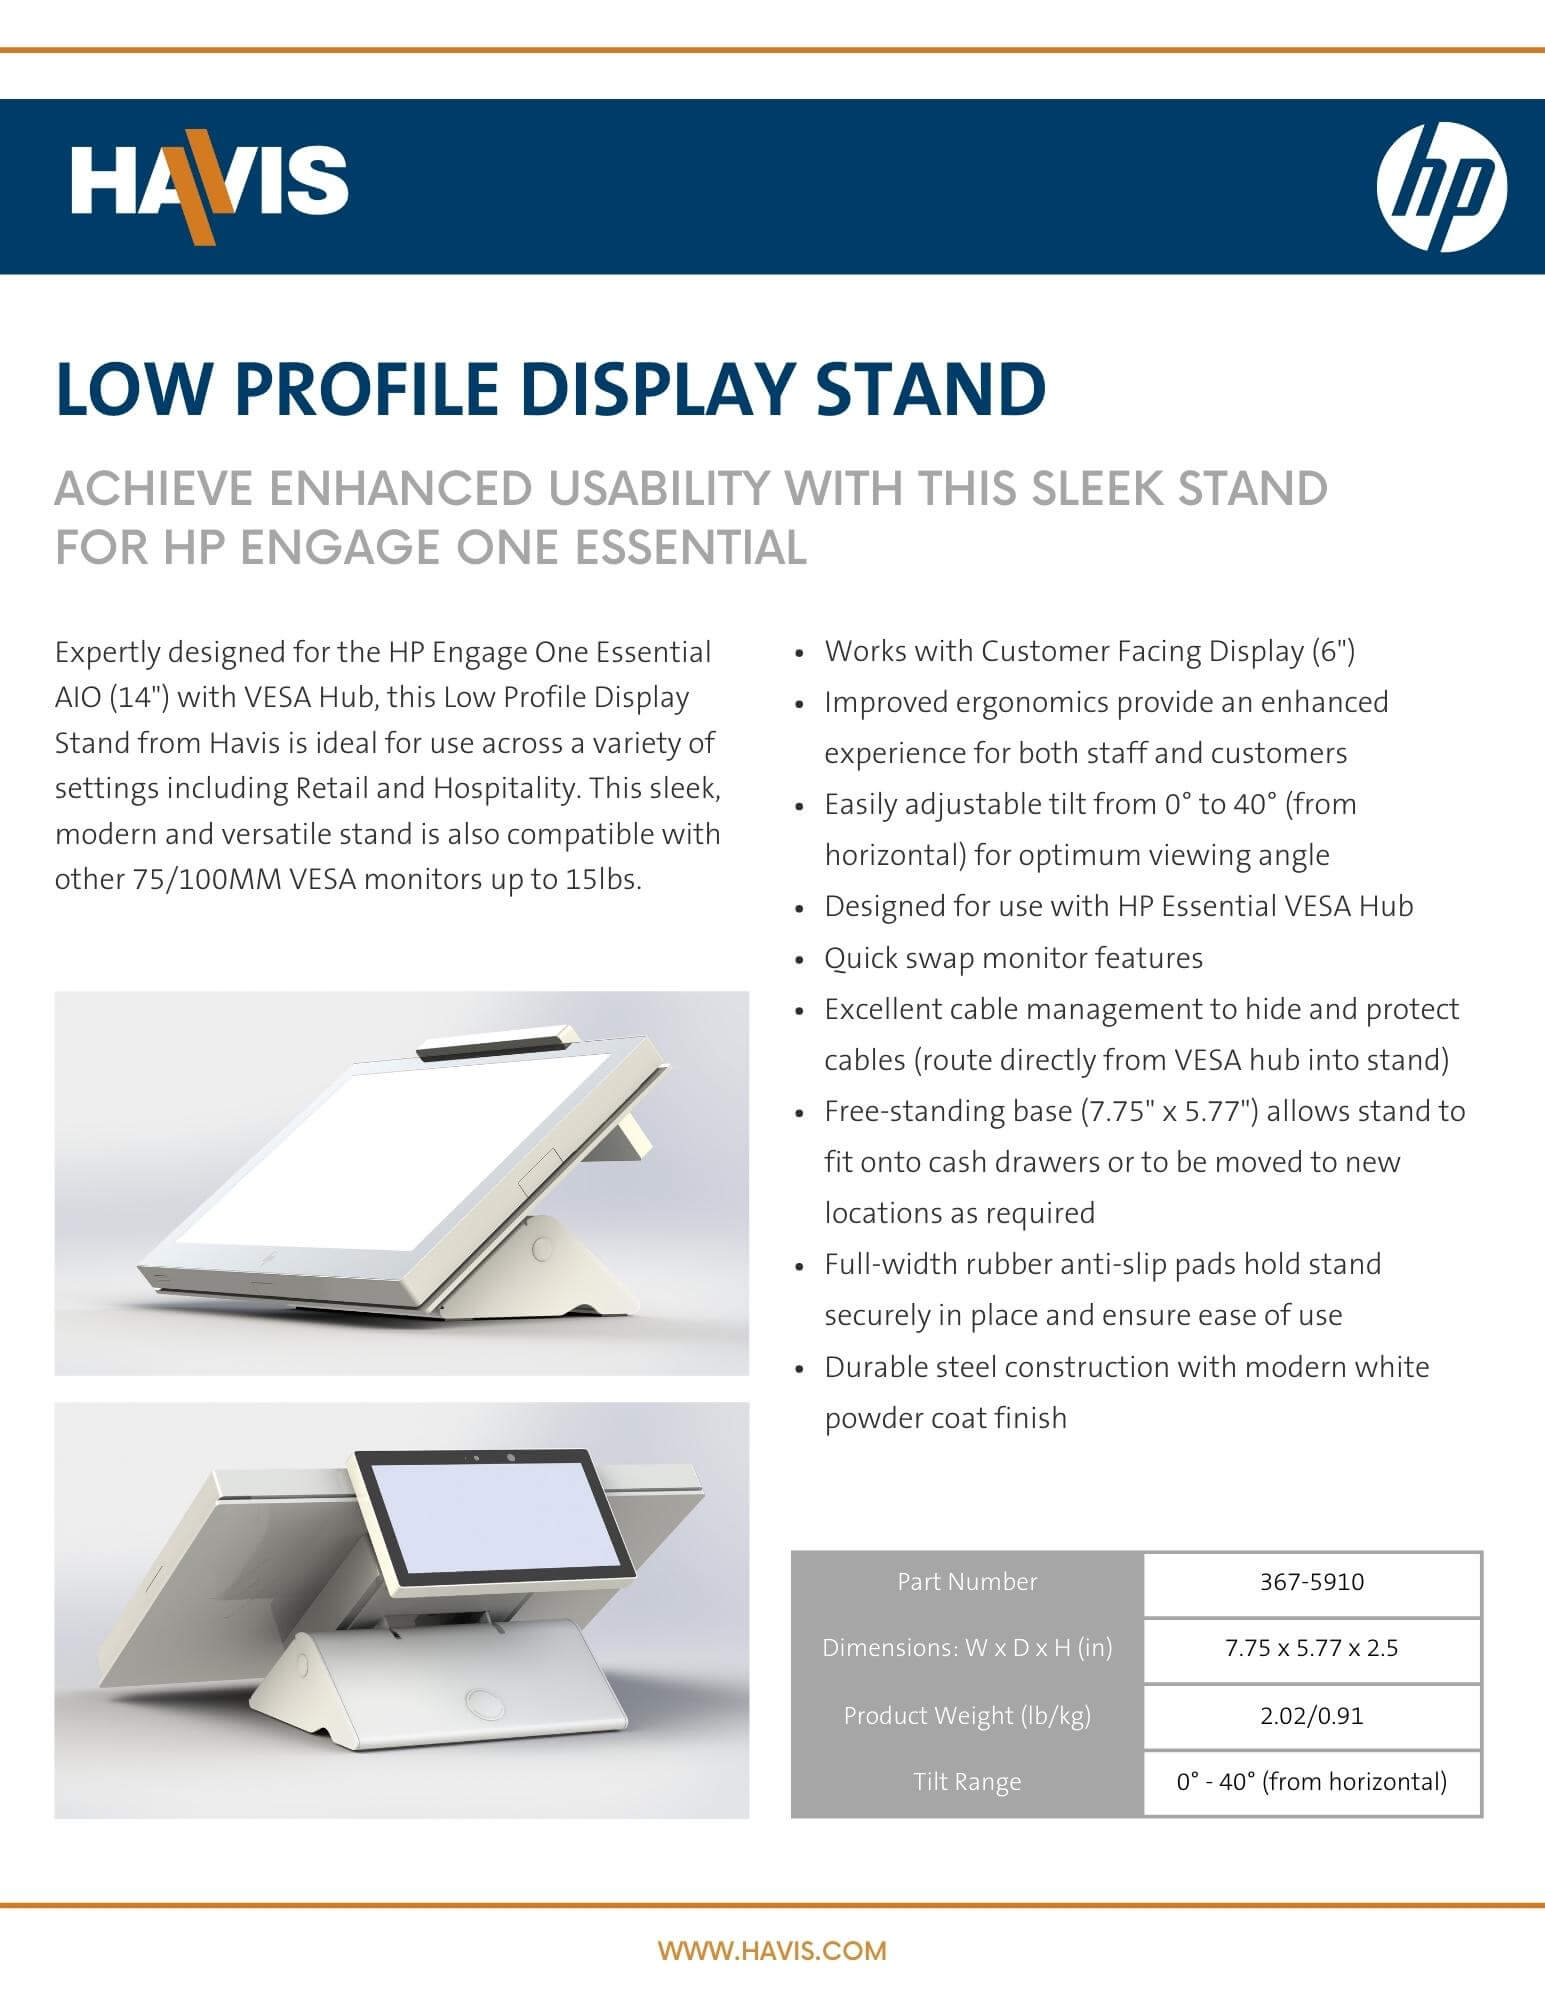 Low Profile Display Stand for HP Engage One Essential Datasheet